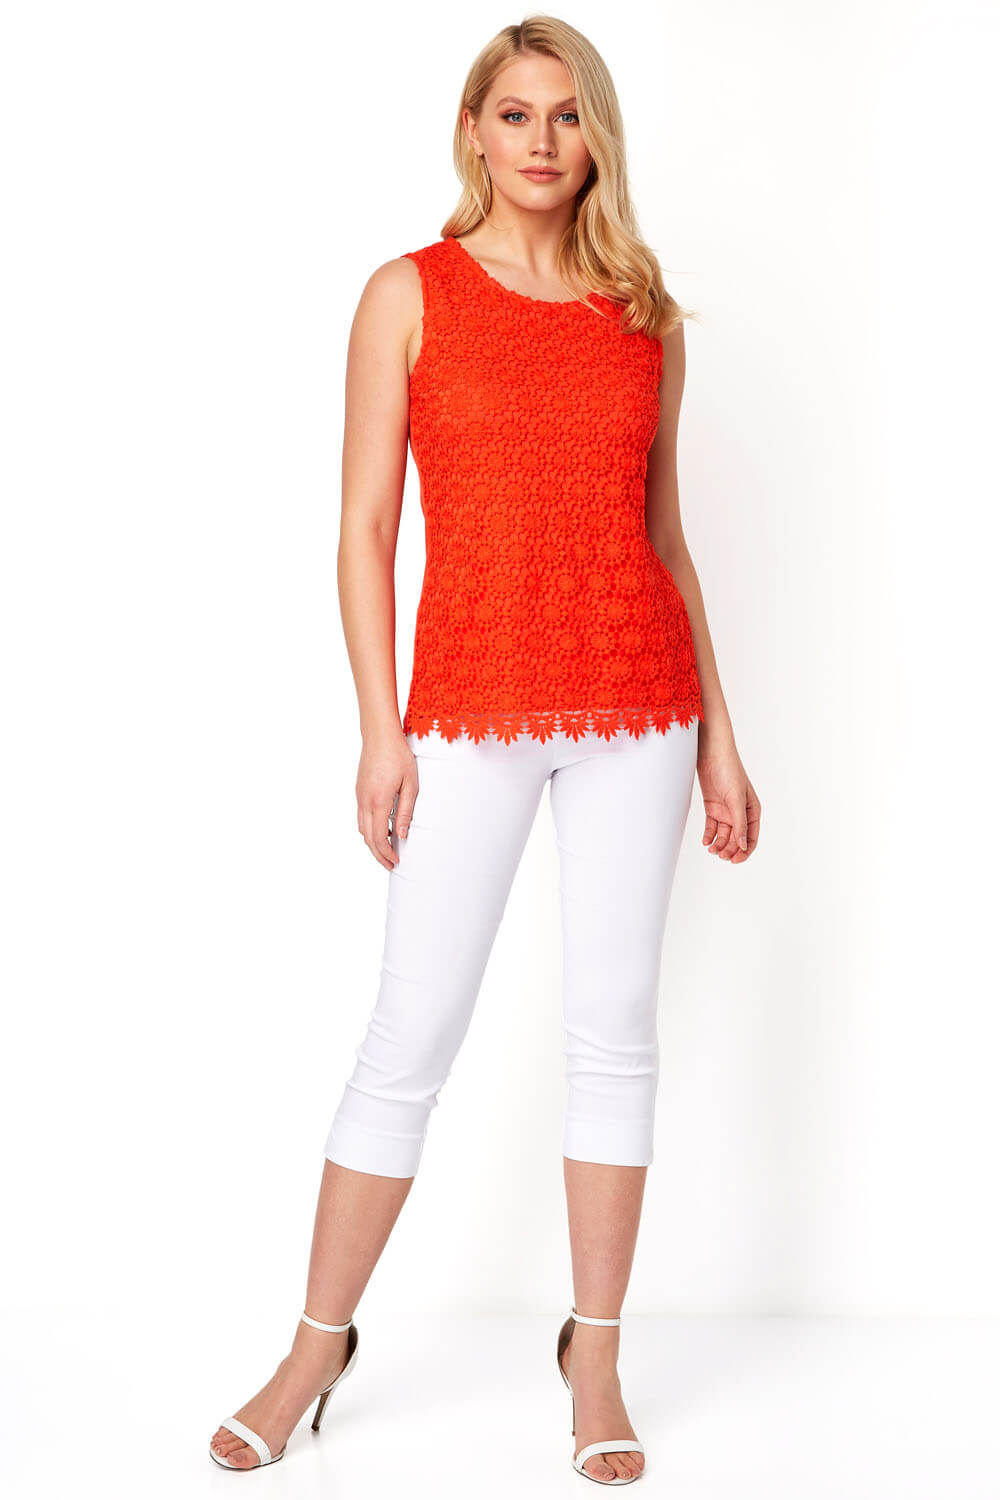 ORANGE Lace Jersey Top, Image 2 of 9